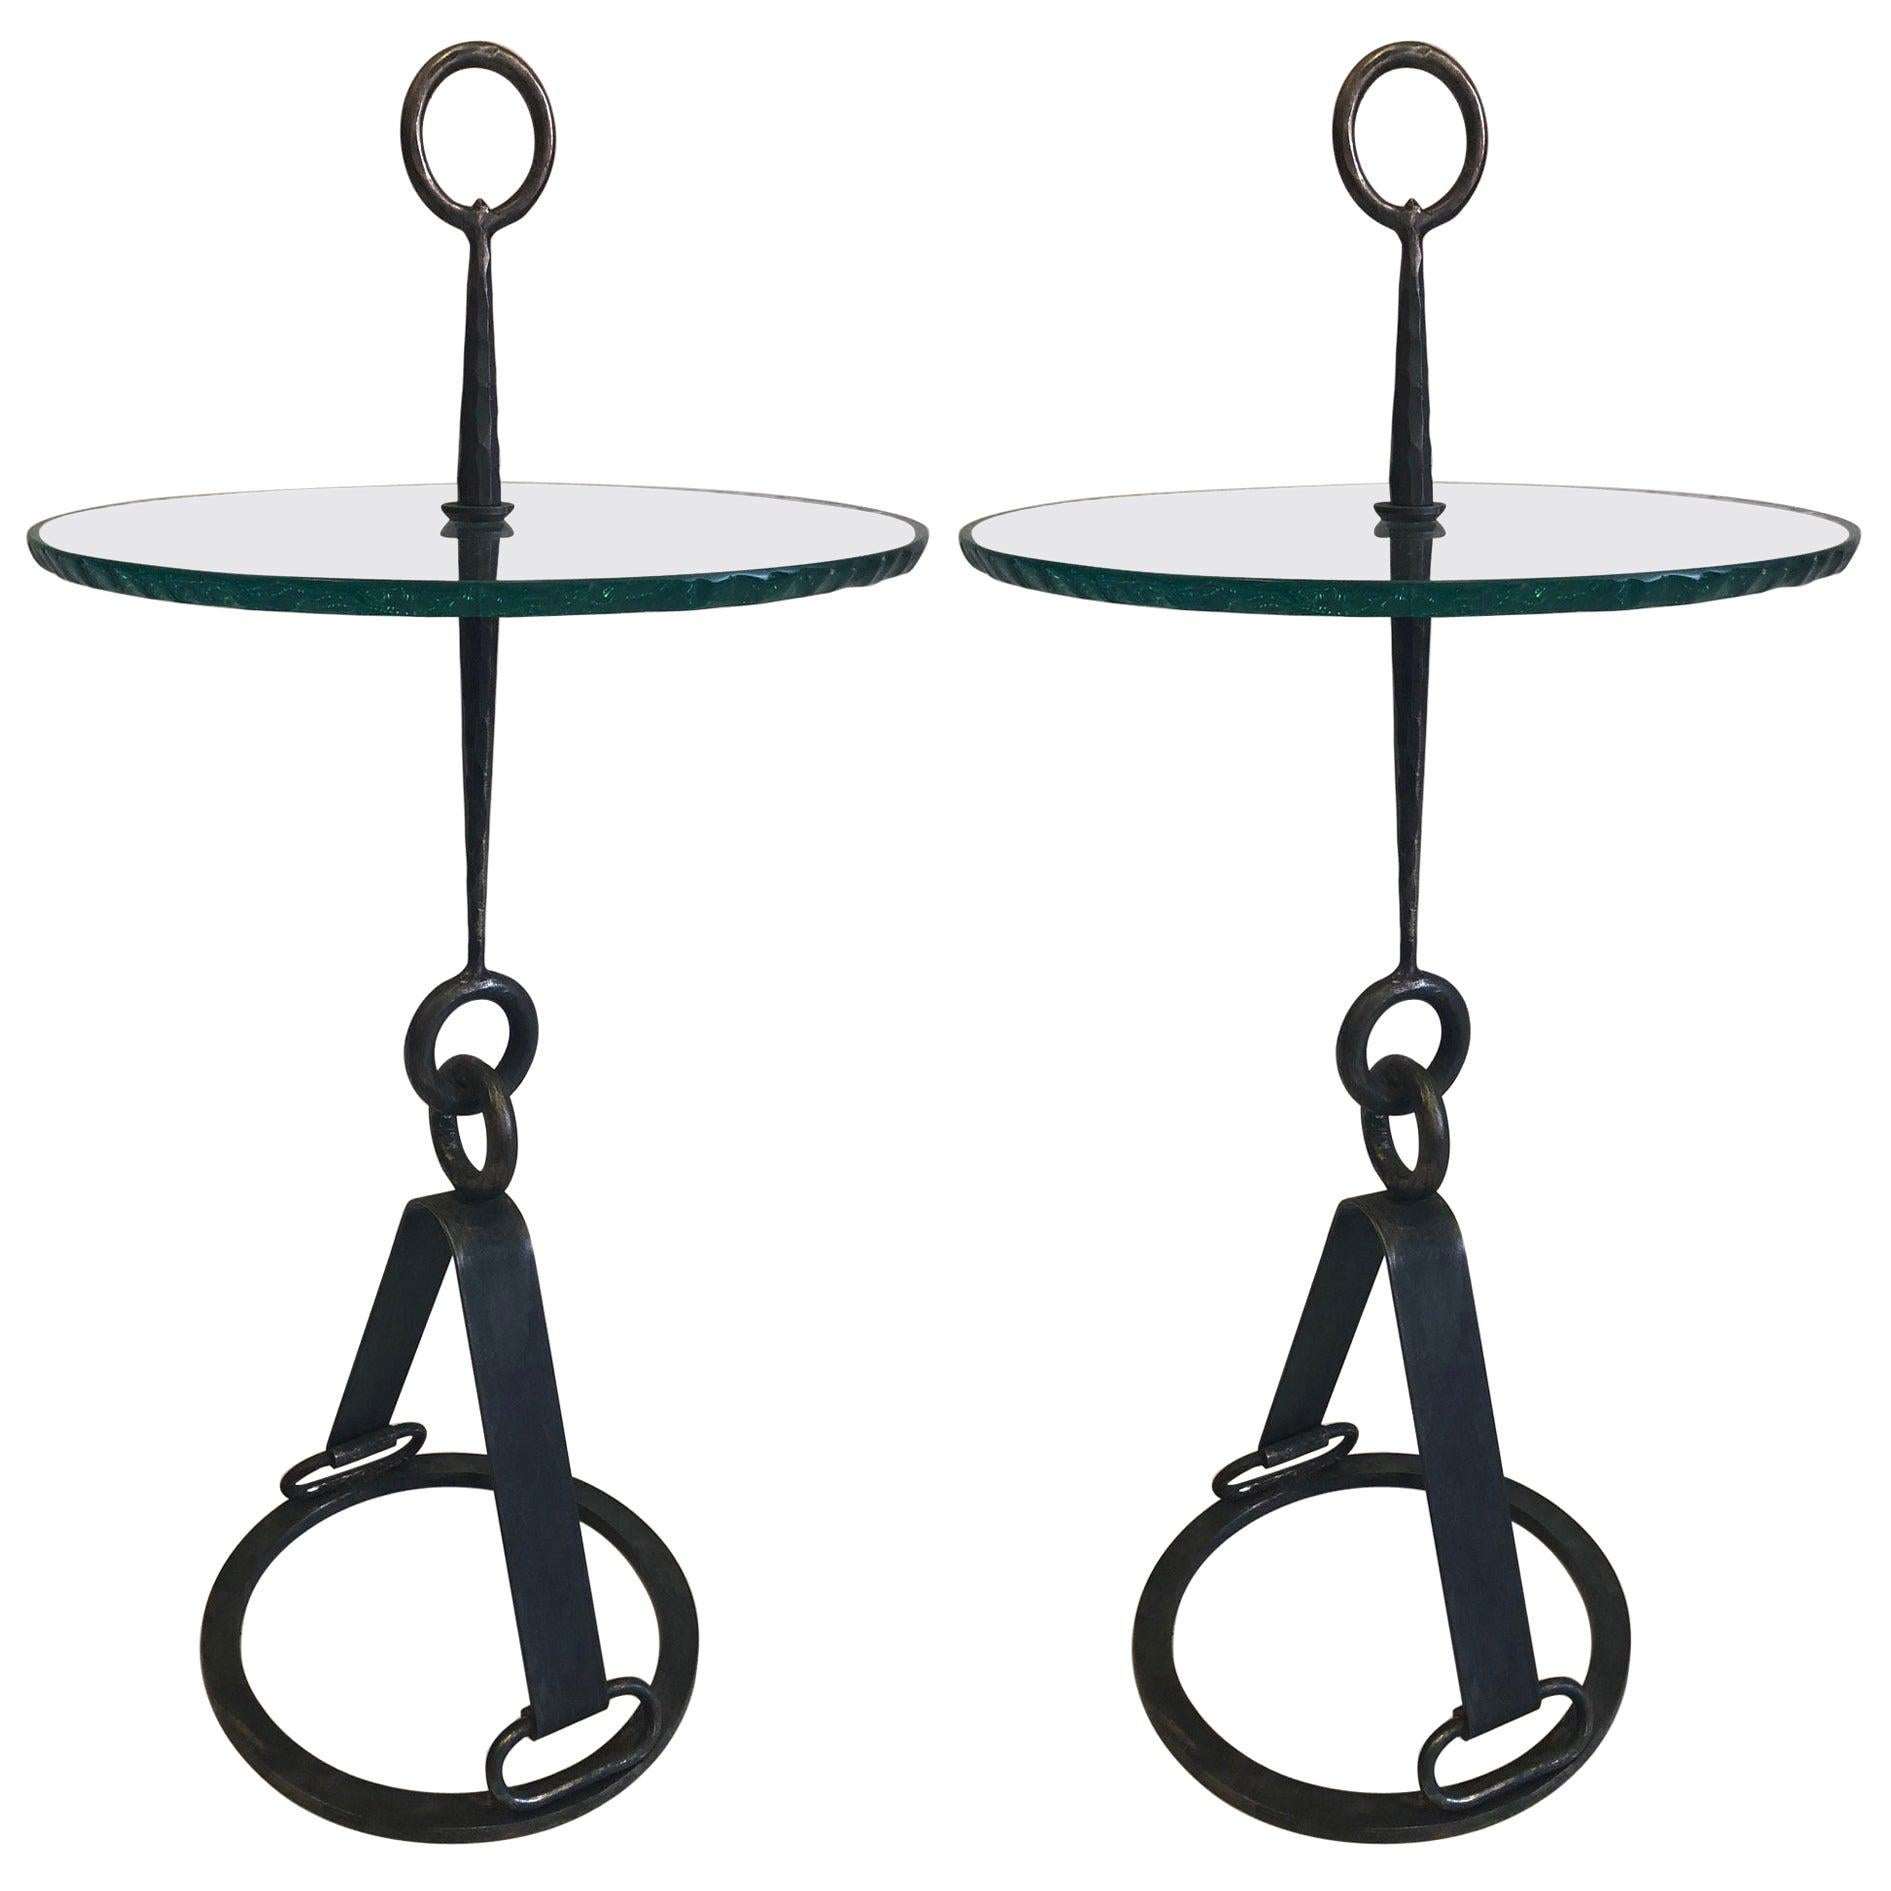 Pair of Modern Neoclassical Wrought Iron Side Tables, Giovanni Banci and Hermes